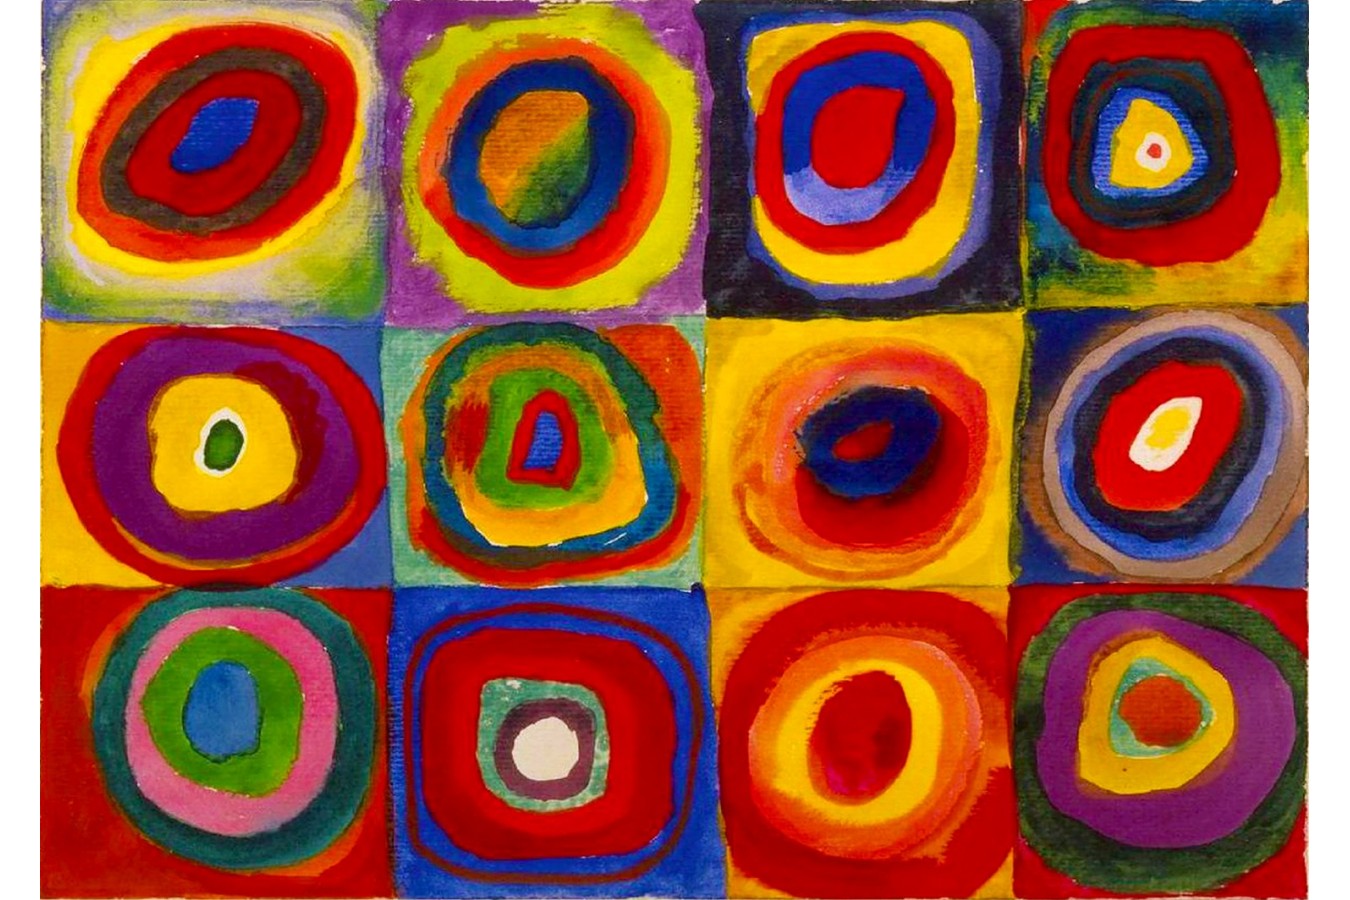 Puzzle 1000 piese Enjoy - Vassily Kandinsky: Color Study - Squares with Concentric Circles, Wassily Kandinsky (Enjoy-1542)